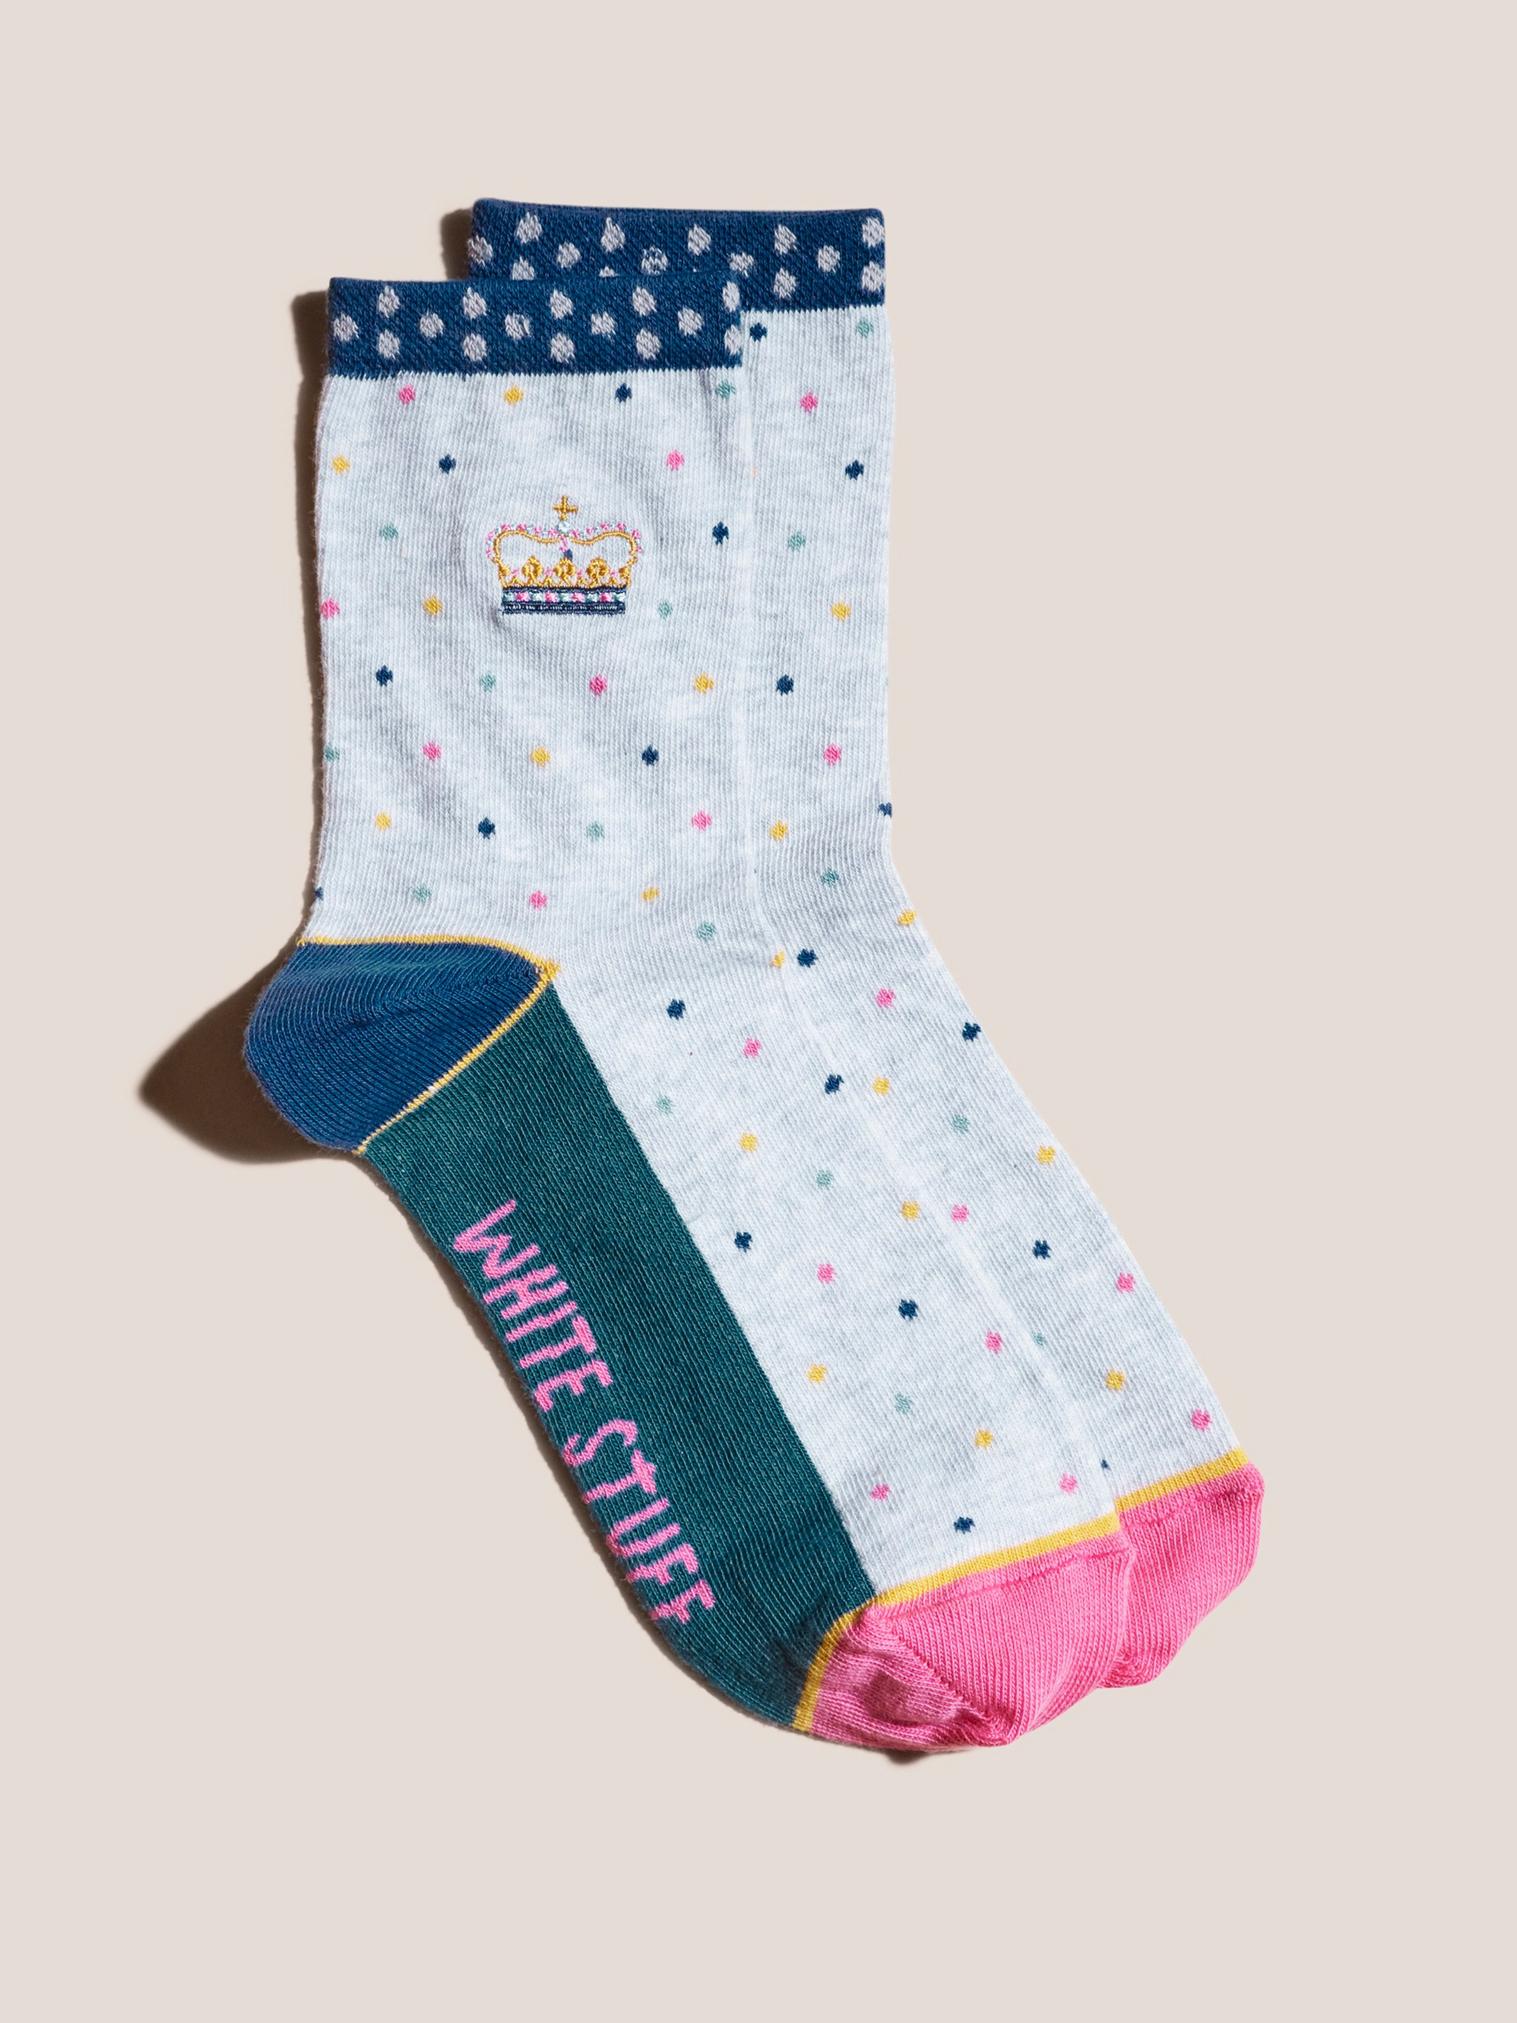 Embroidered Crown Ankle Socks in GREY MLT - FLAT FRONT